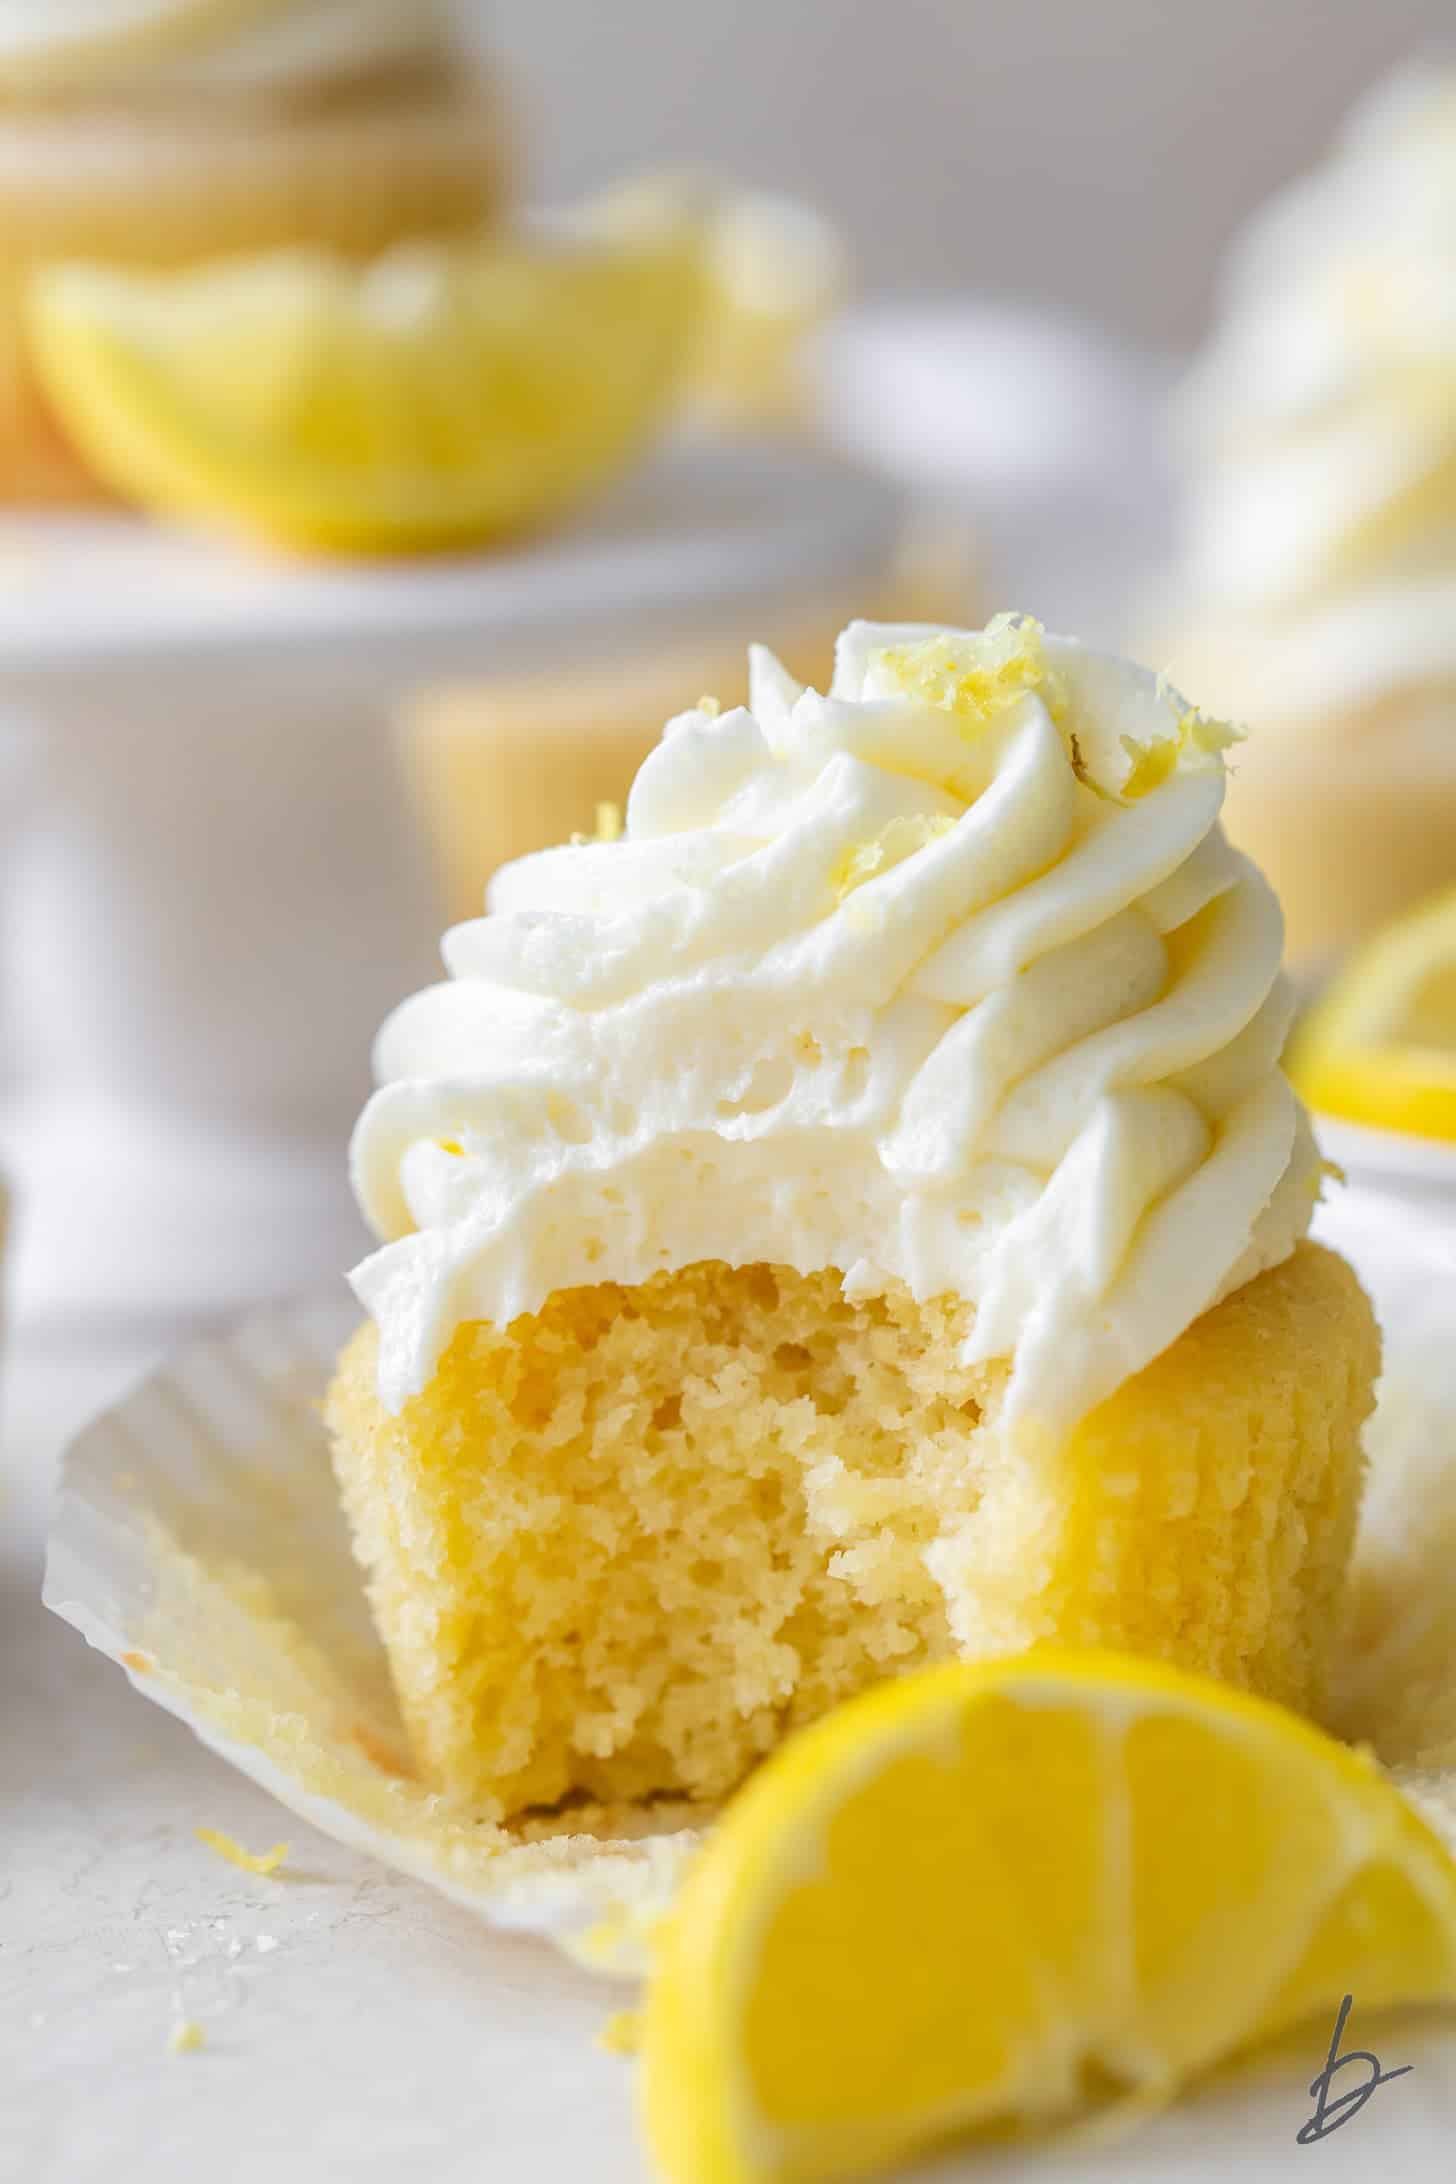 Lemon cupcake with white lemon buttercream with missing bite featuring lemon slices in back/foreground.